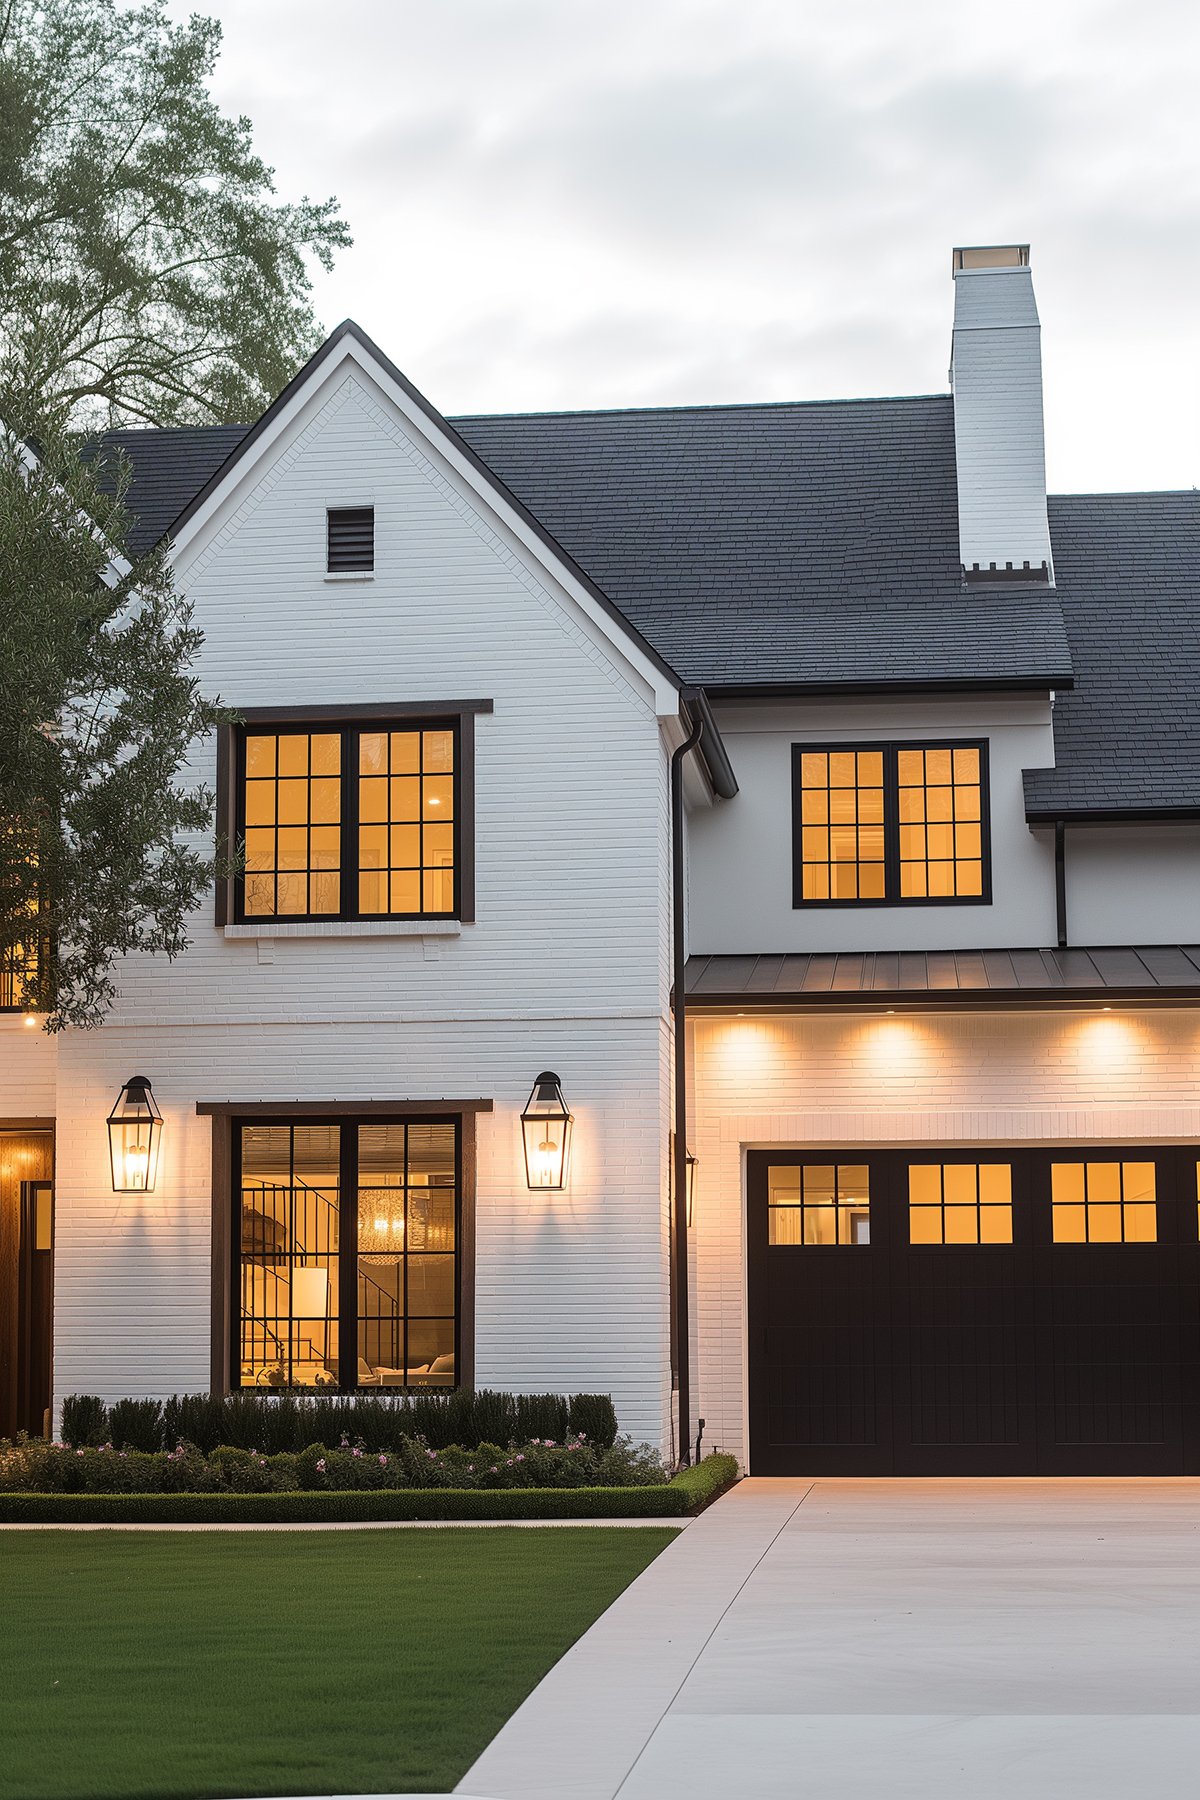 House with Benjamin Moore Simply White painted brick and black windows and garage doors.